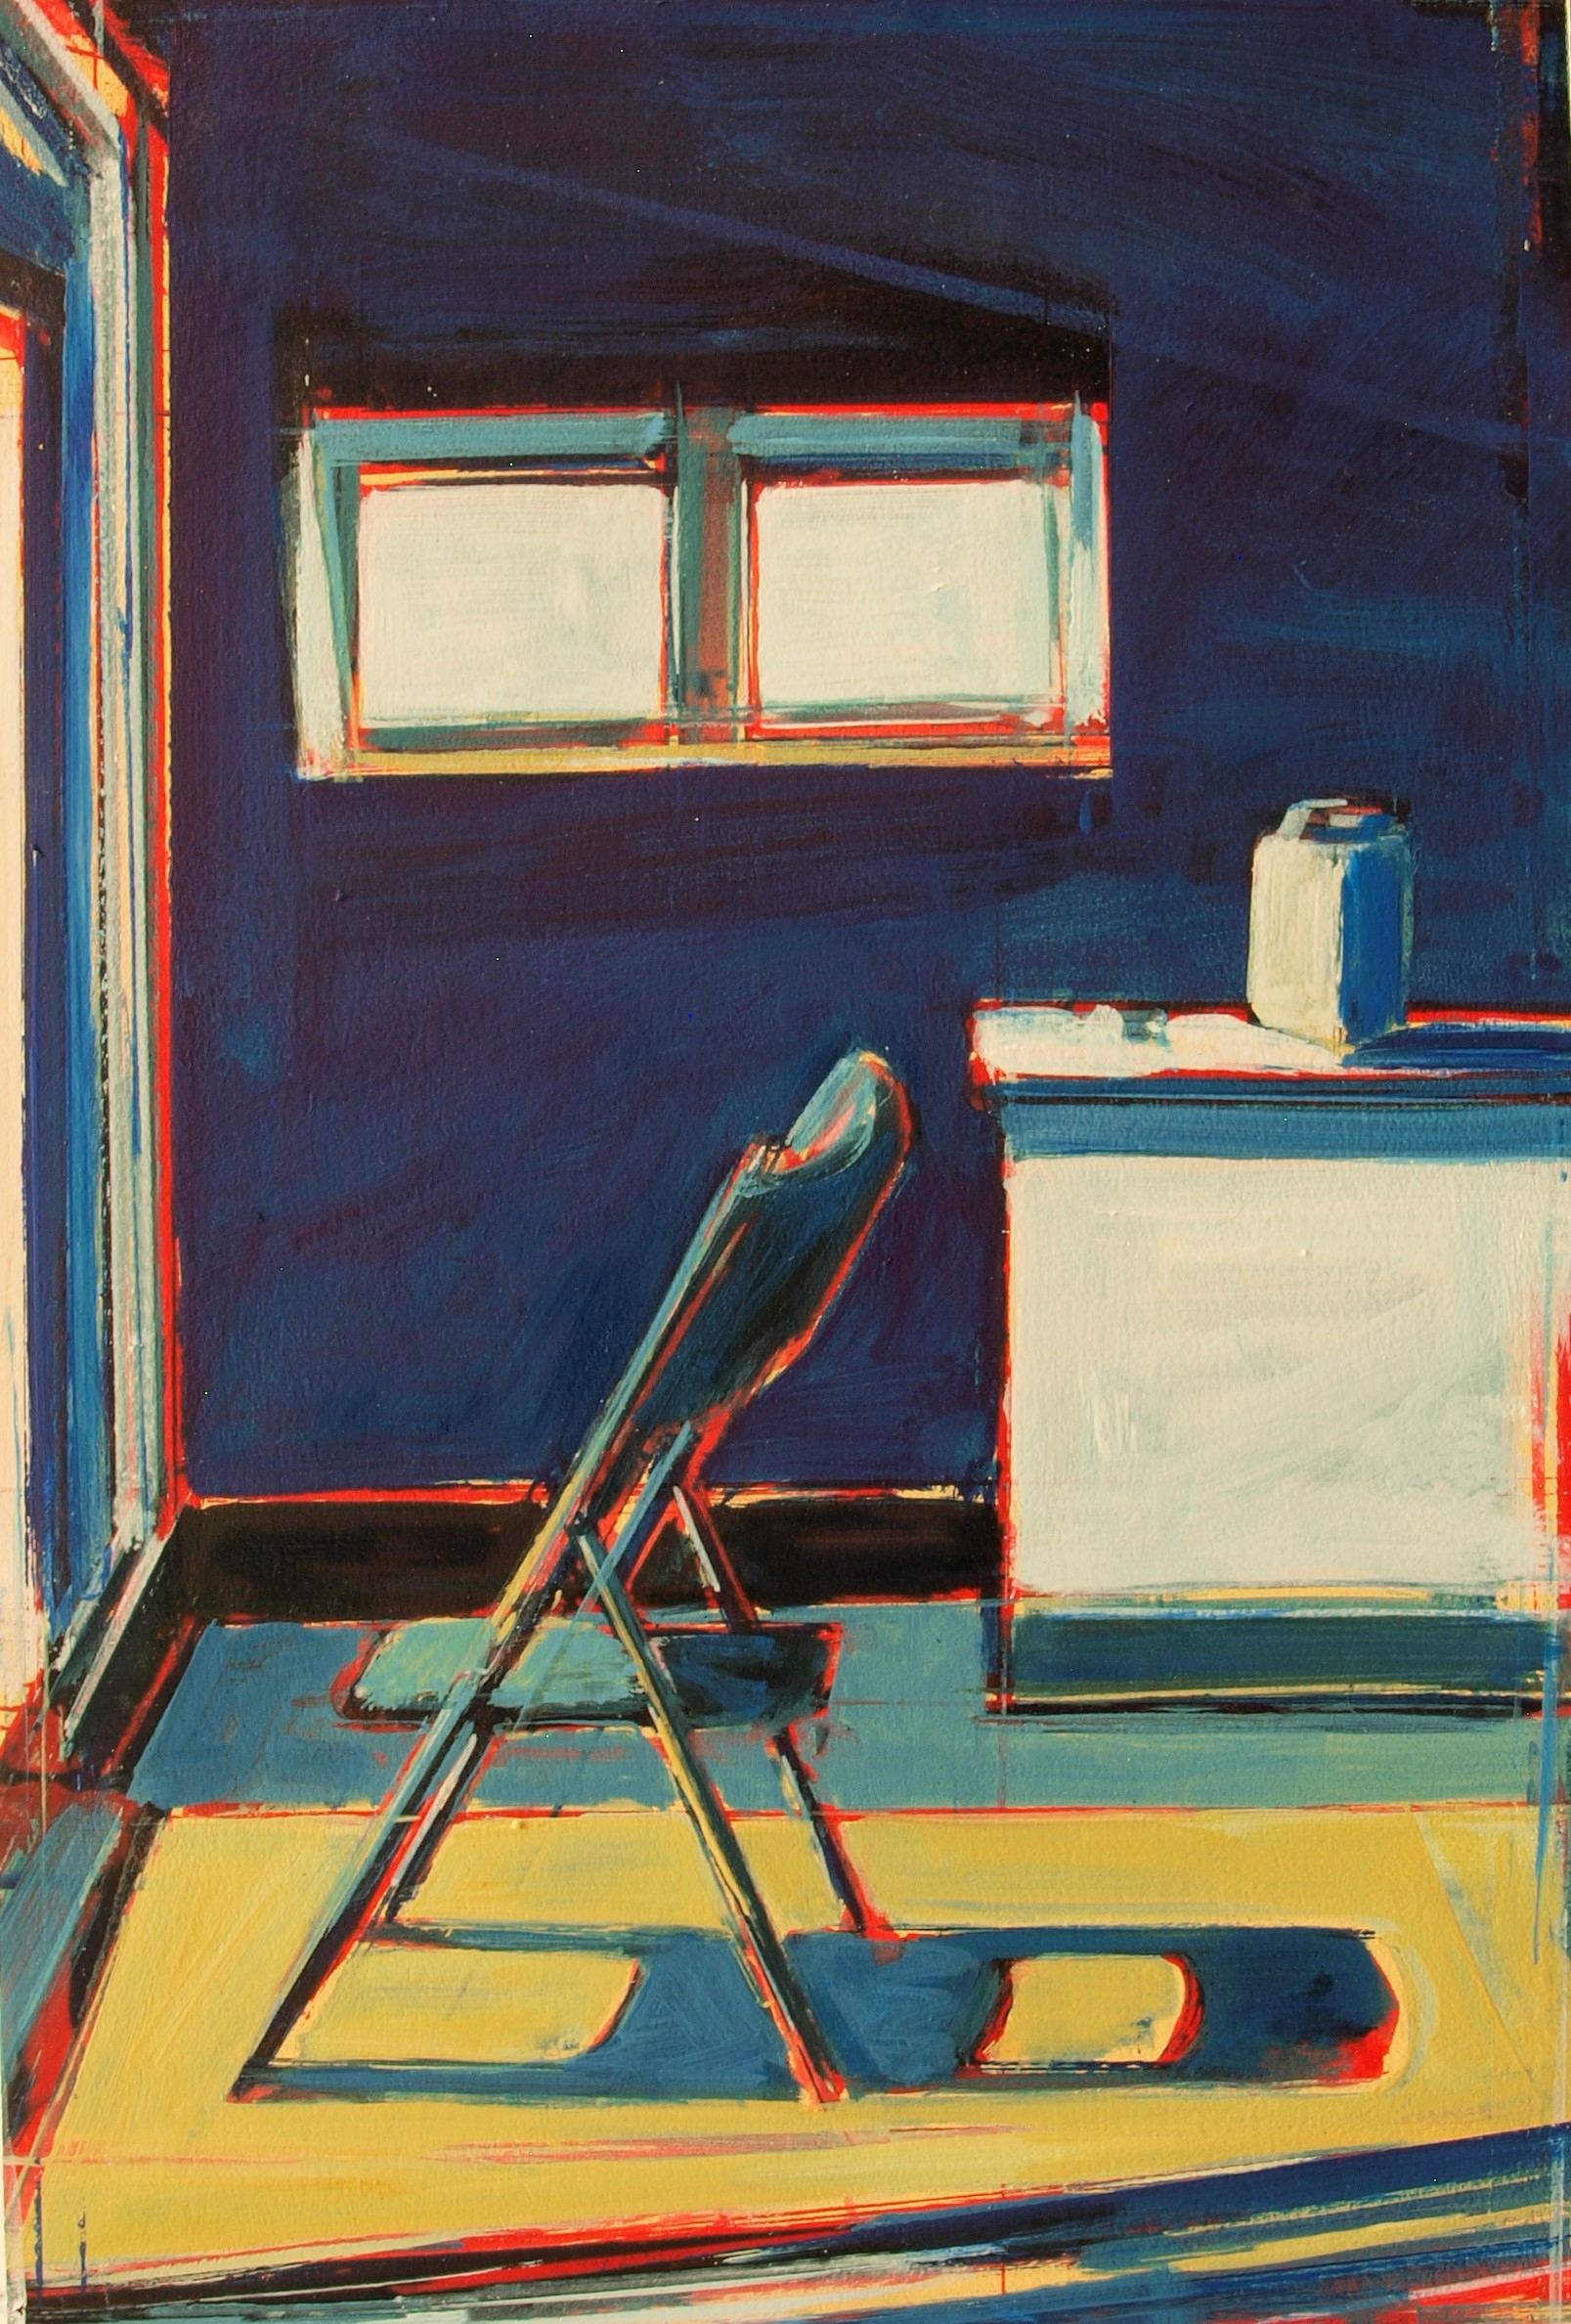 Studio Interior with Folded Chair - Tom Voyce